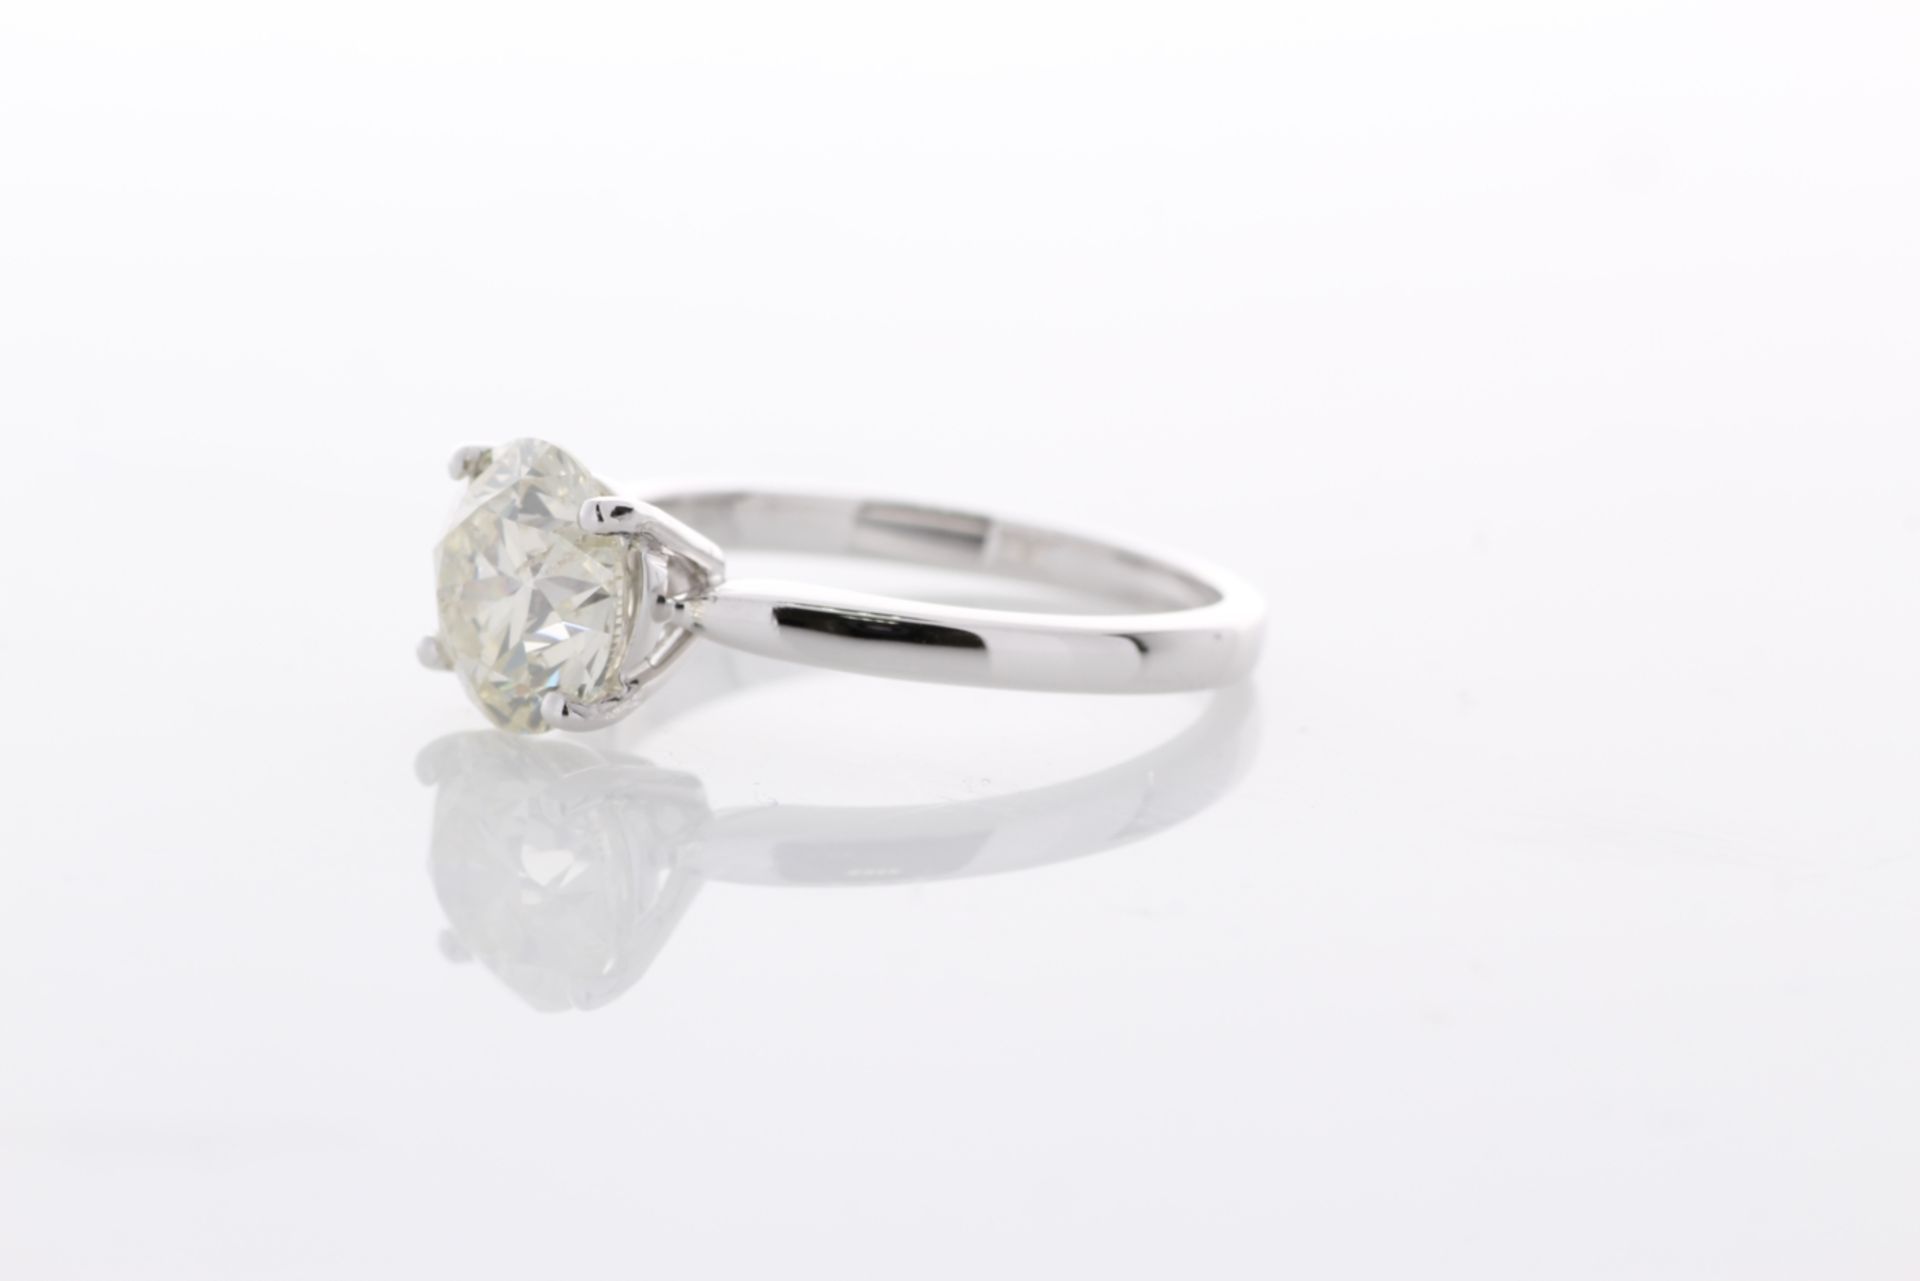 18ct White Gold Single Stone Prong Set Diamond Ring 2.02 Carats - Valued by GIE £43,155.00 - A - Image 2 of 5